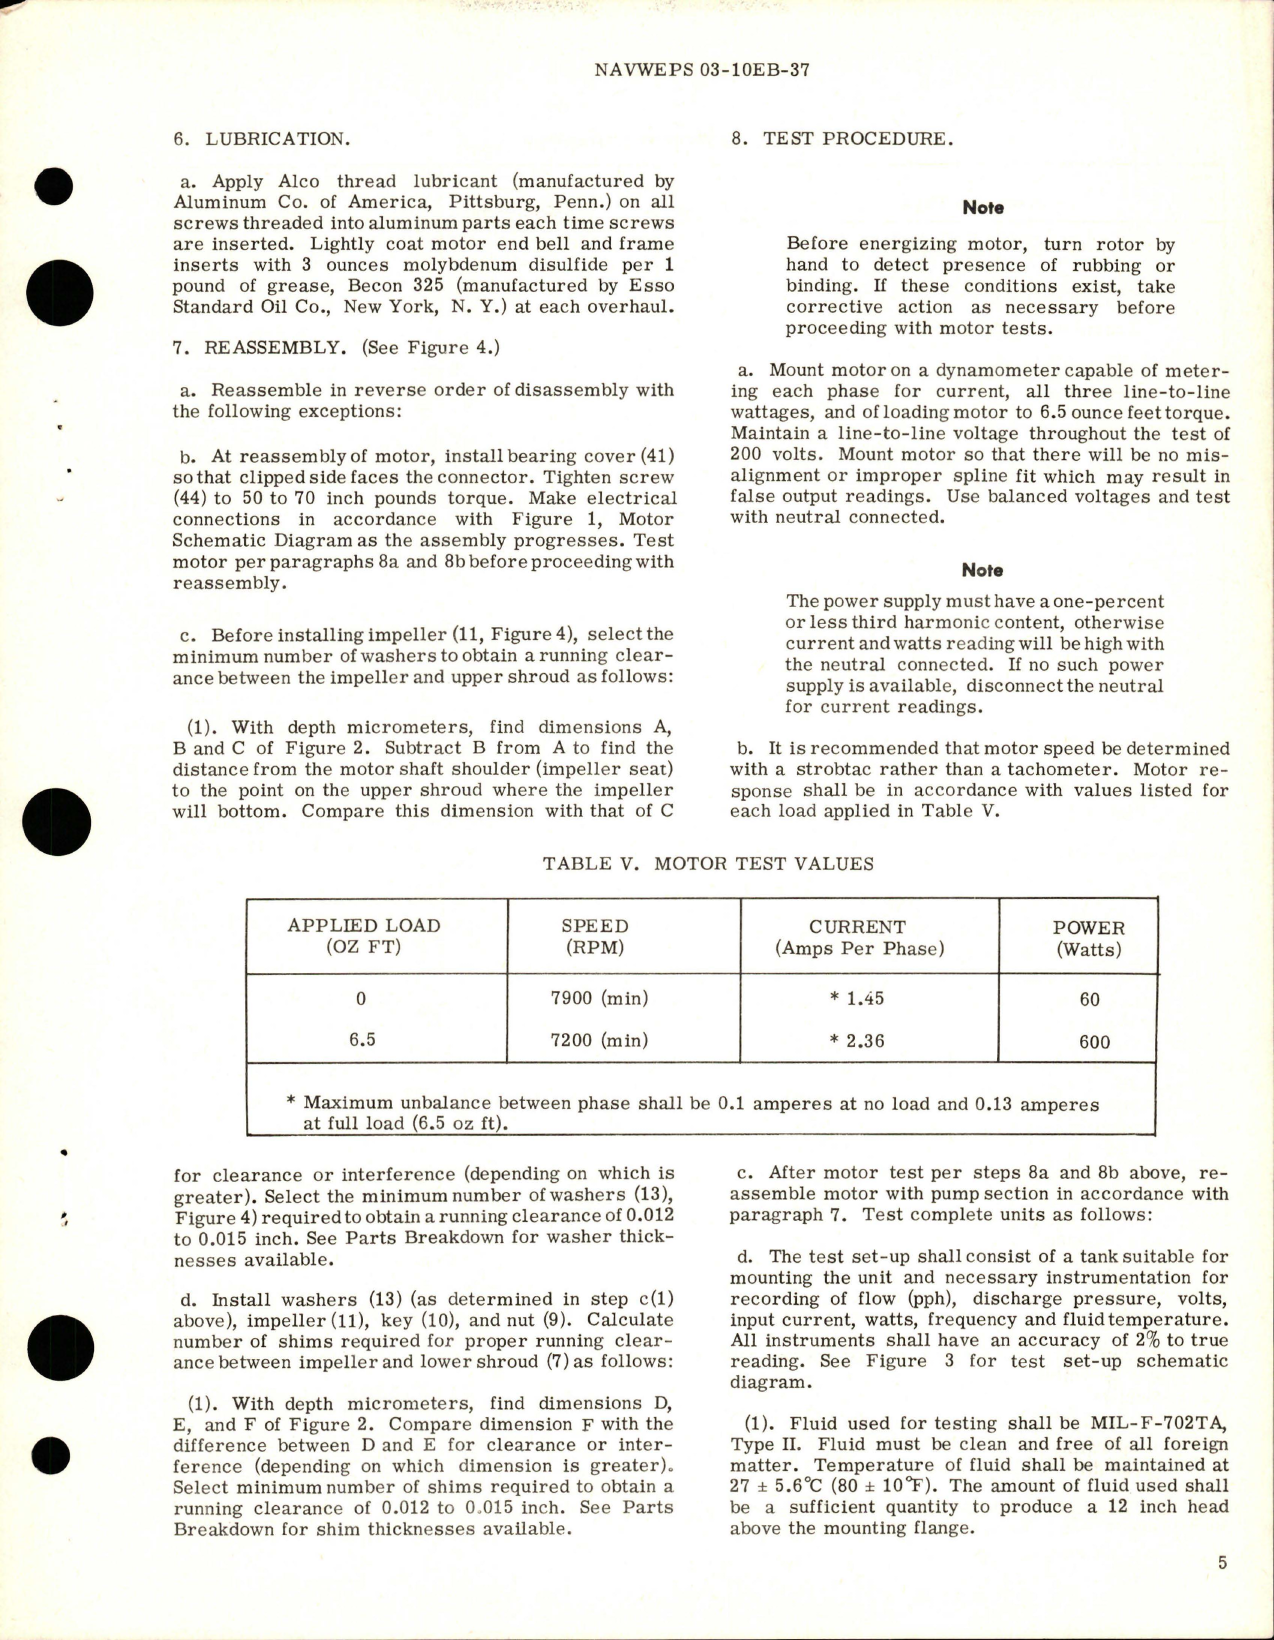 Sample page 5 from AirCorps Library document: Overhaul Instructions with Parts Breakdown for Fuel Booster Pump - Model RR11620-2 and RR11620-3